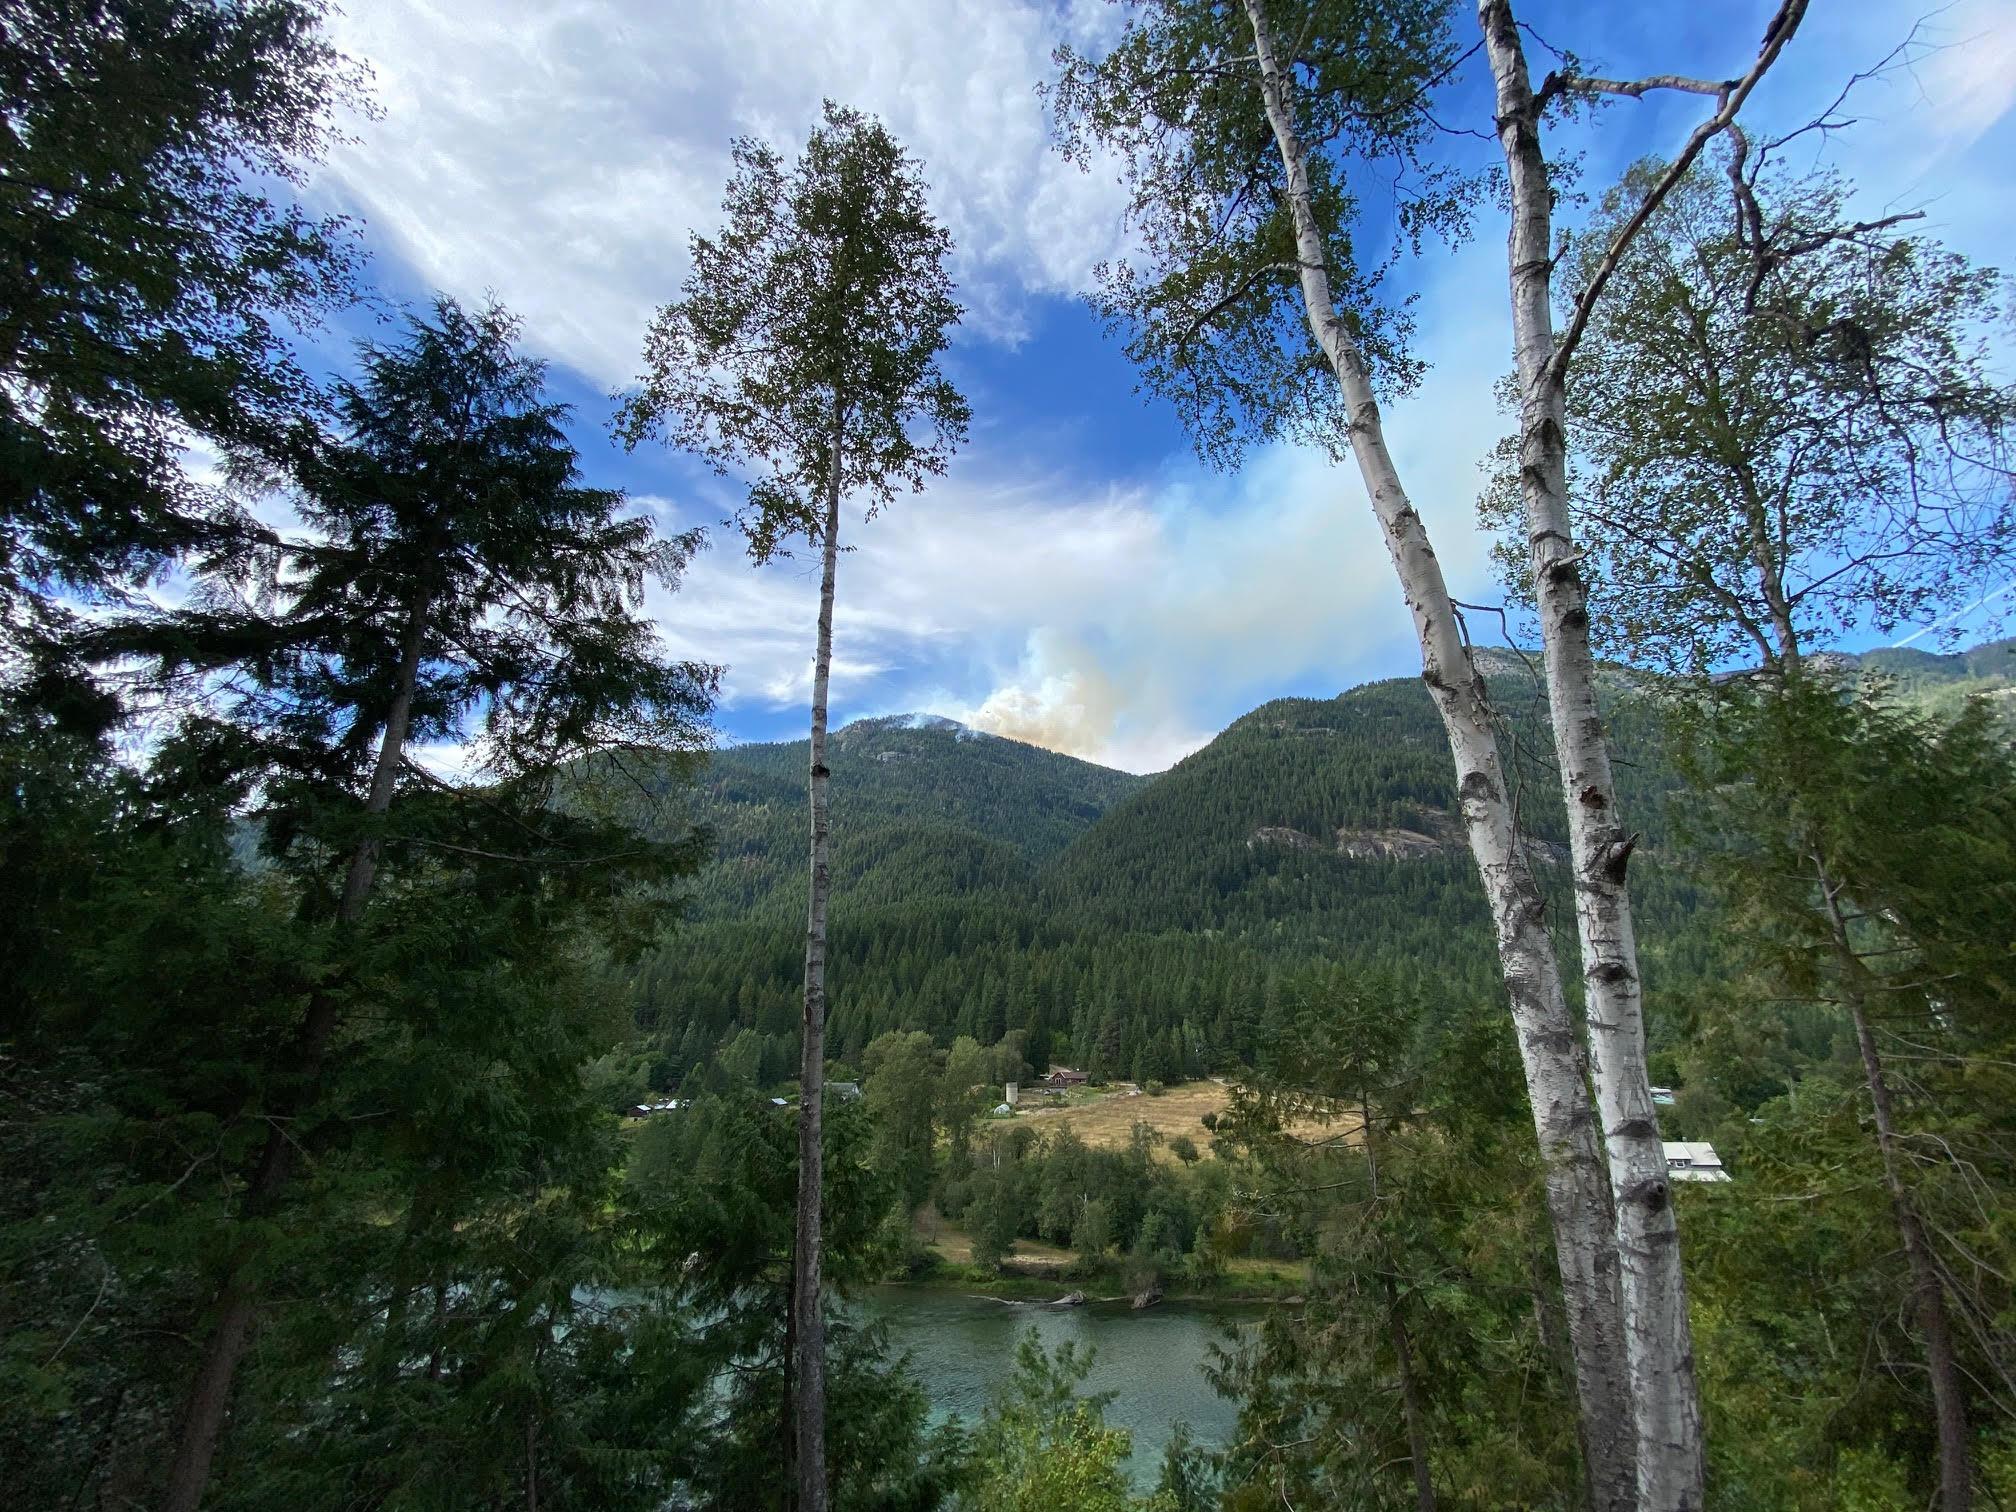 BC Wildfire crews continue to battle Talbot Creek Fire